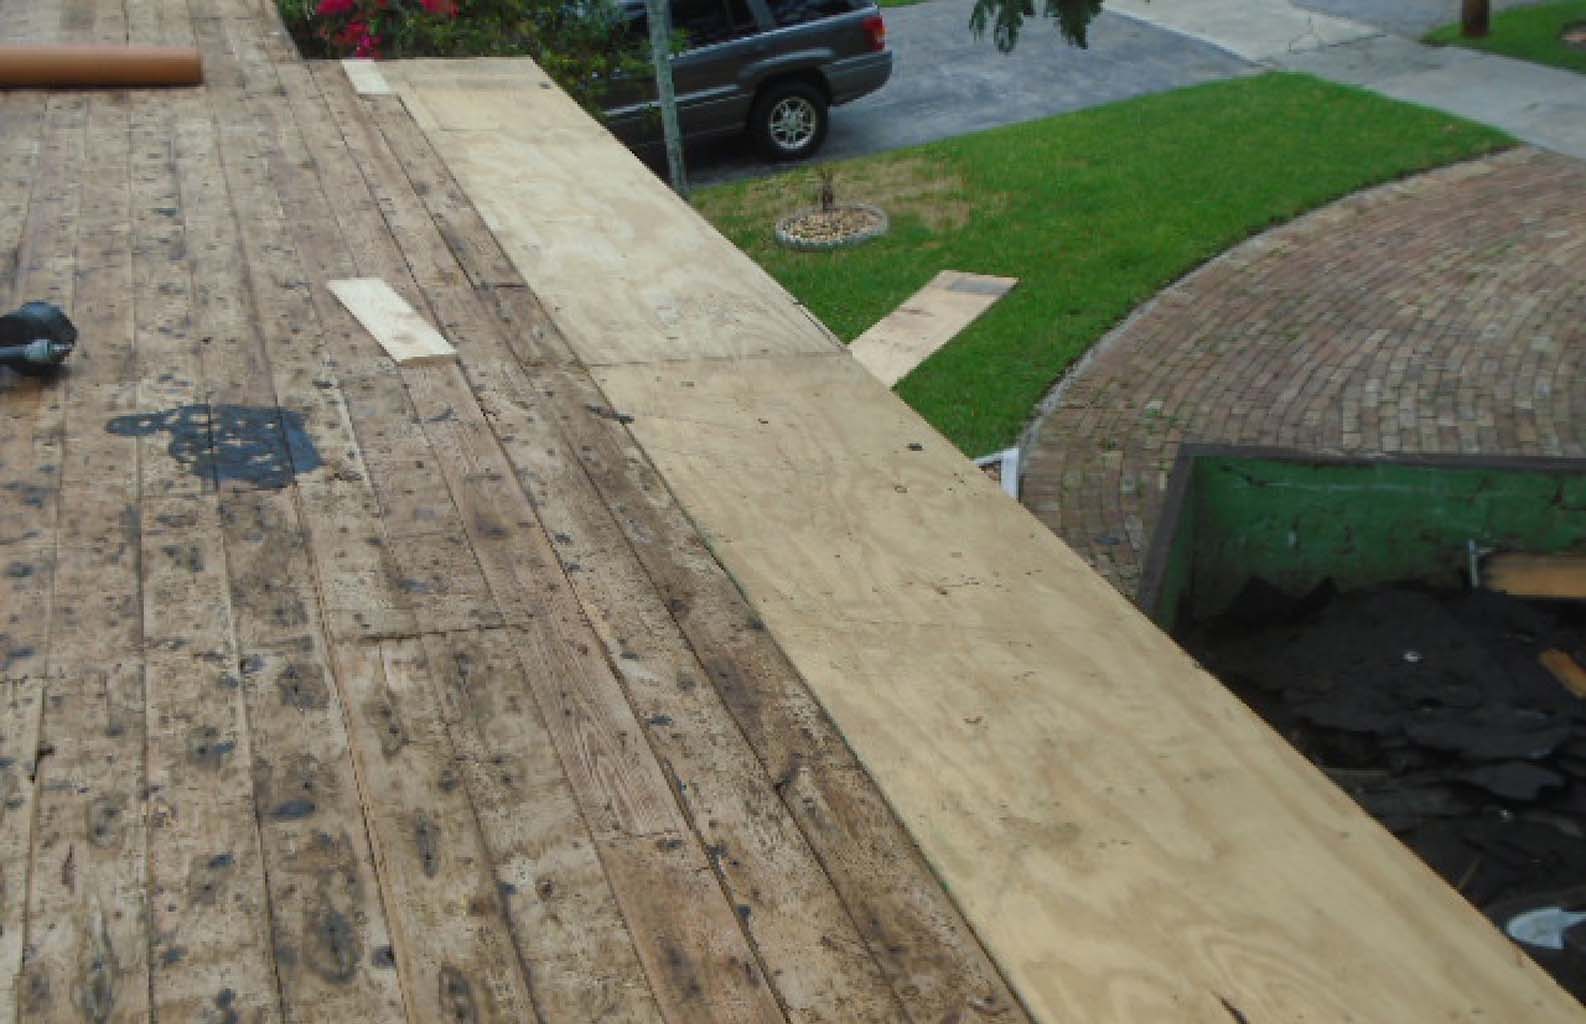 Repairs to rotted decking / sheathing